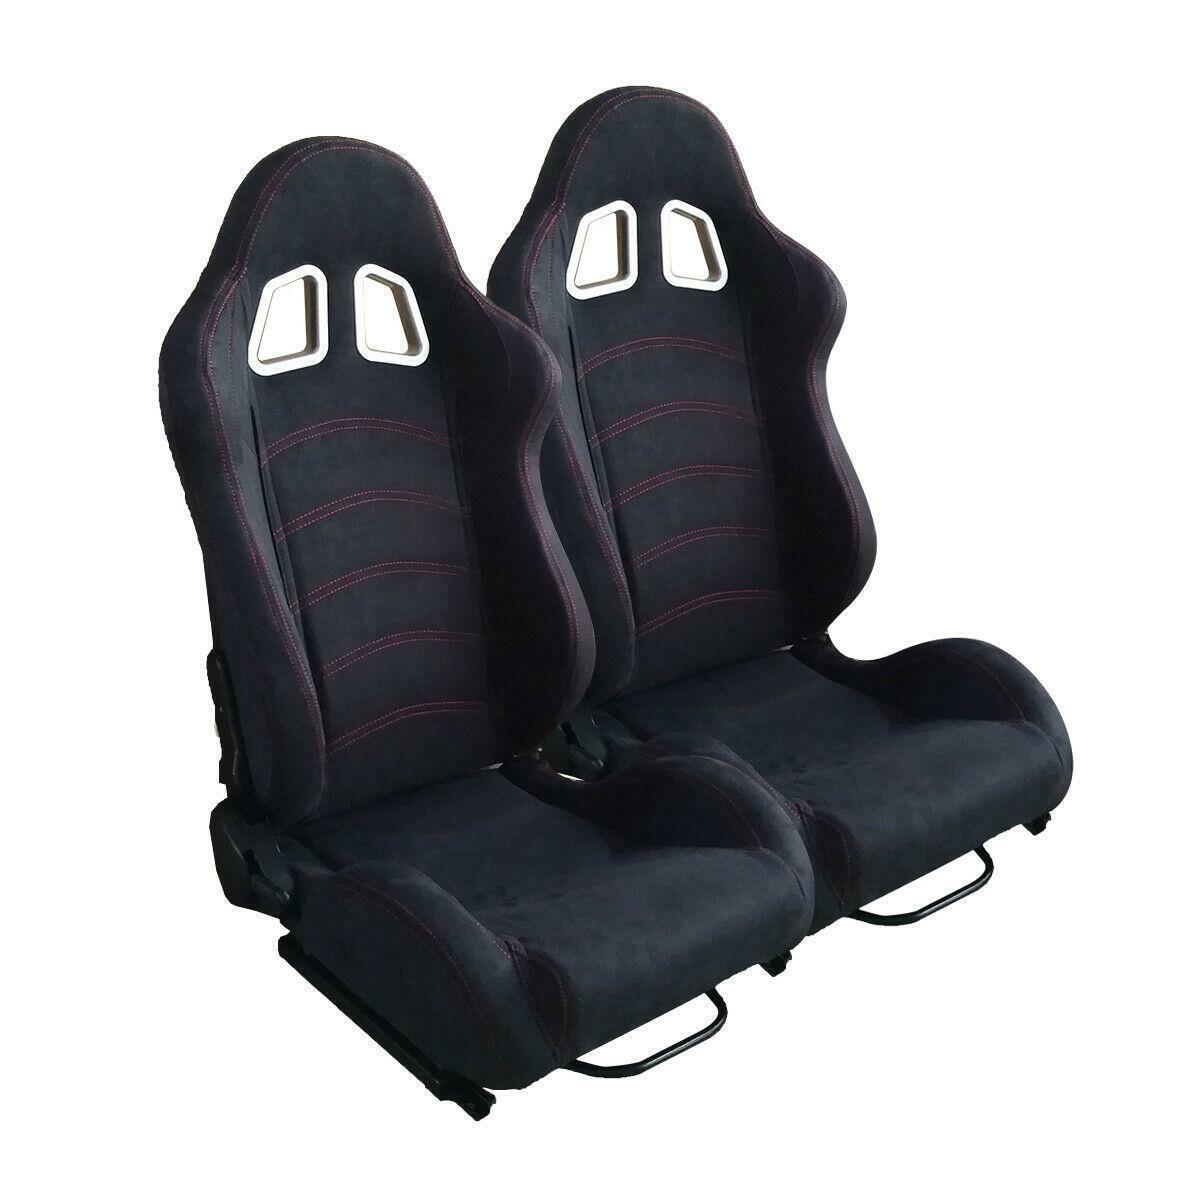 Black Suede Leather Racing Seat Doublr Red Stitch Reclinable Cloth